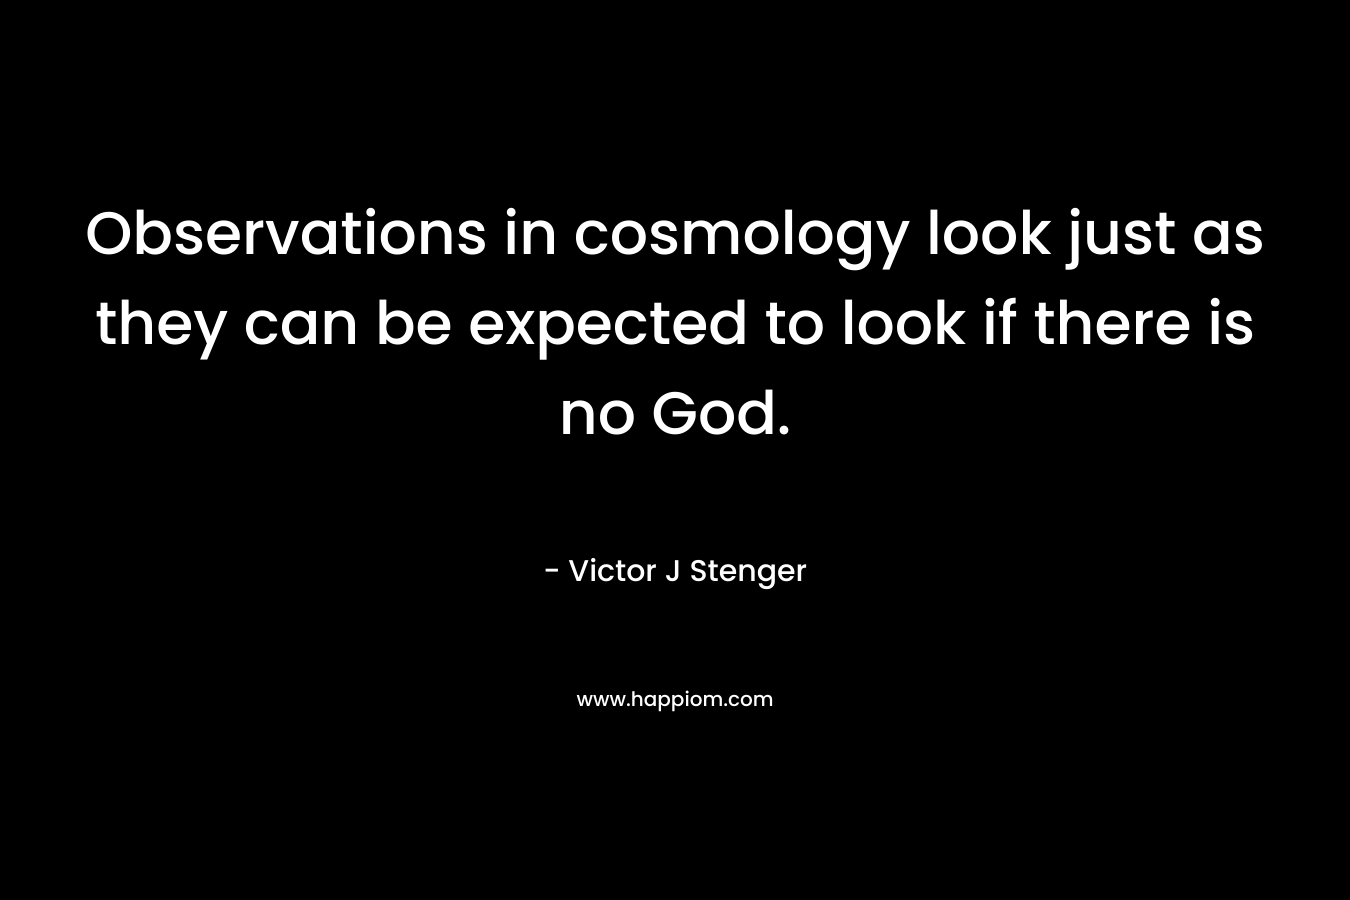 Observations in cosmology look just as they can be expected to look if there is no God. – Victor J Stenger